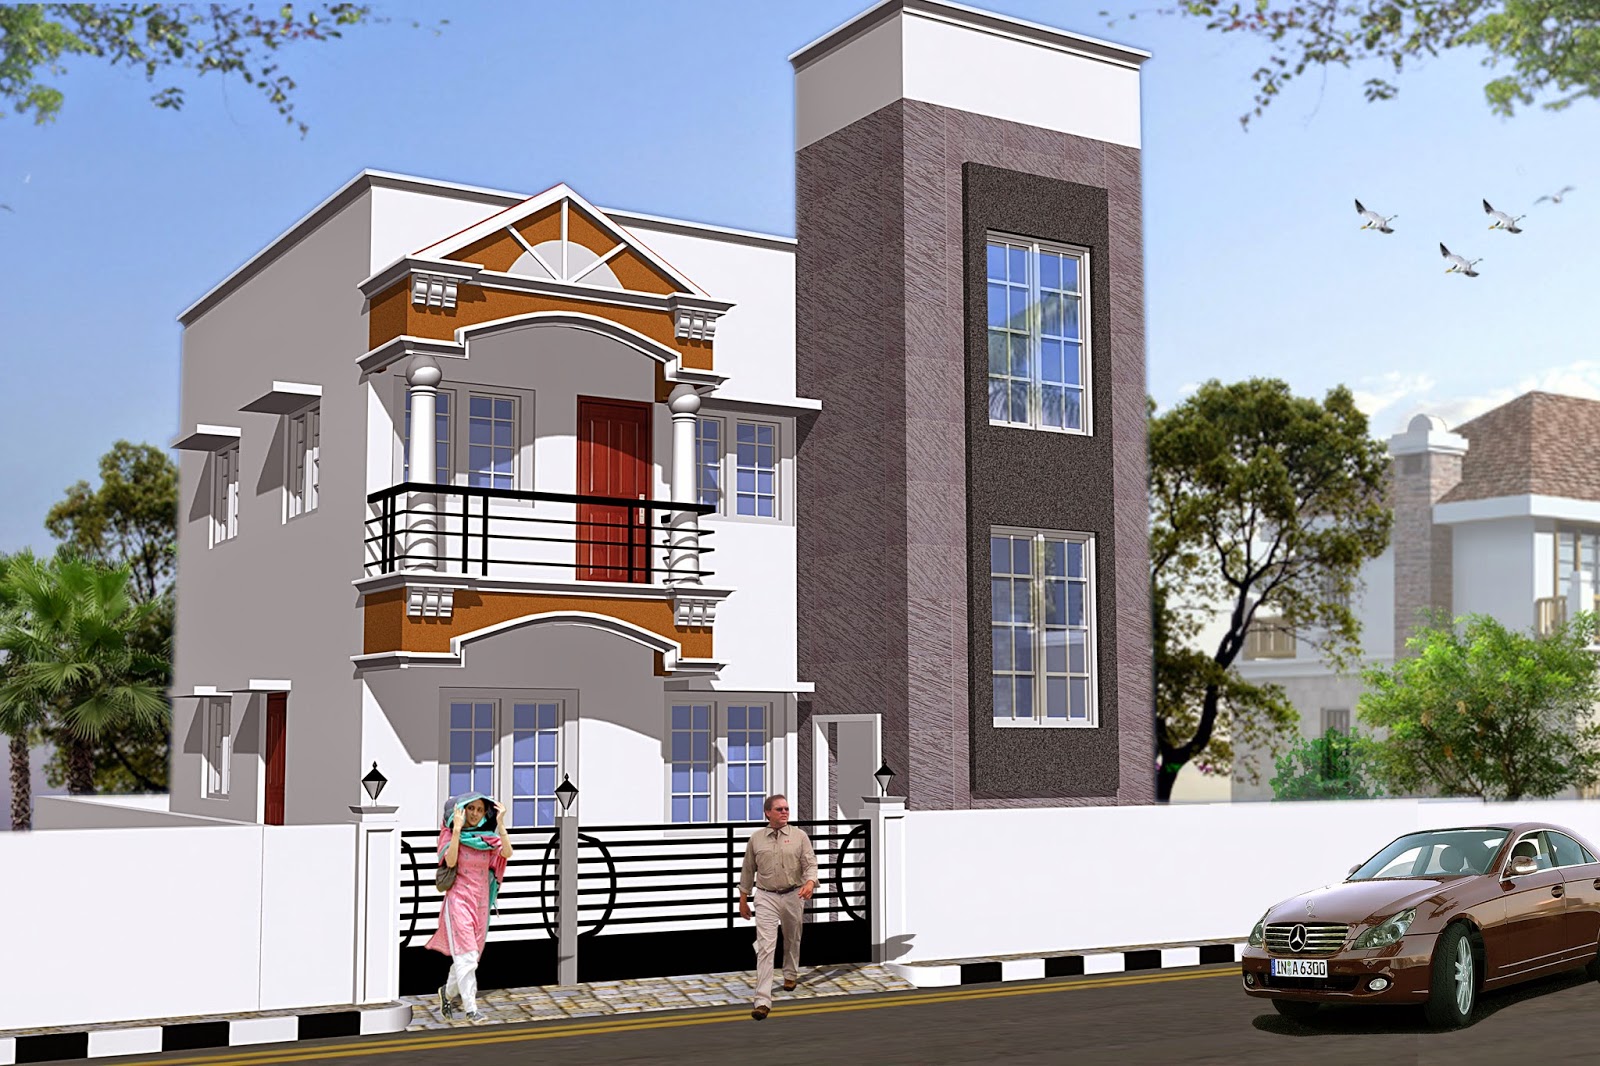 luckydesigners 3D Elevation  Residential  Building